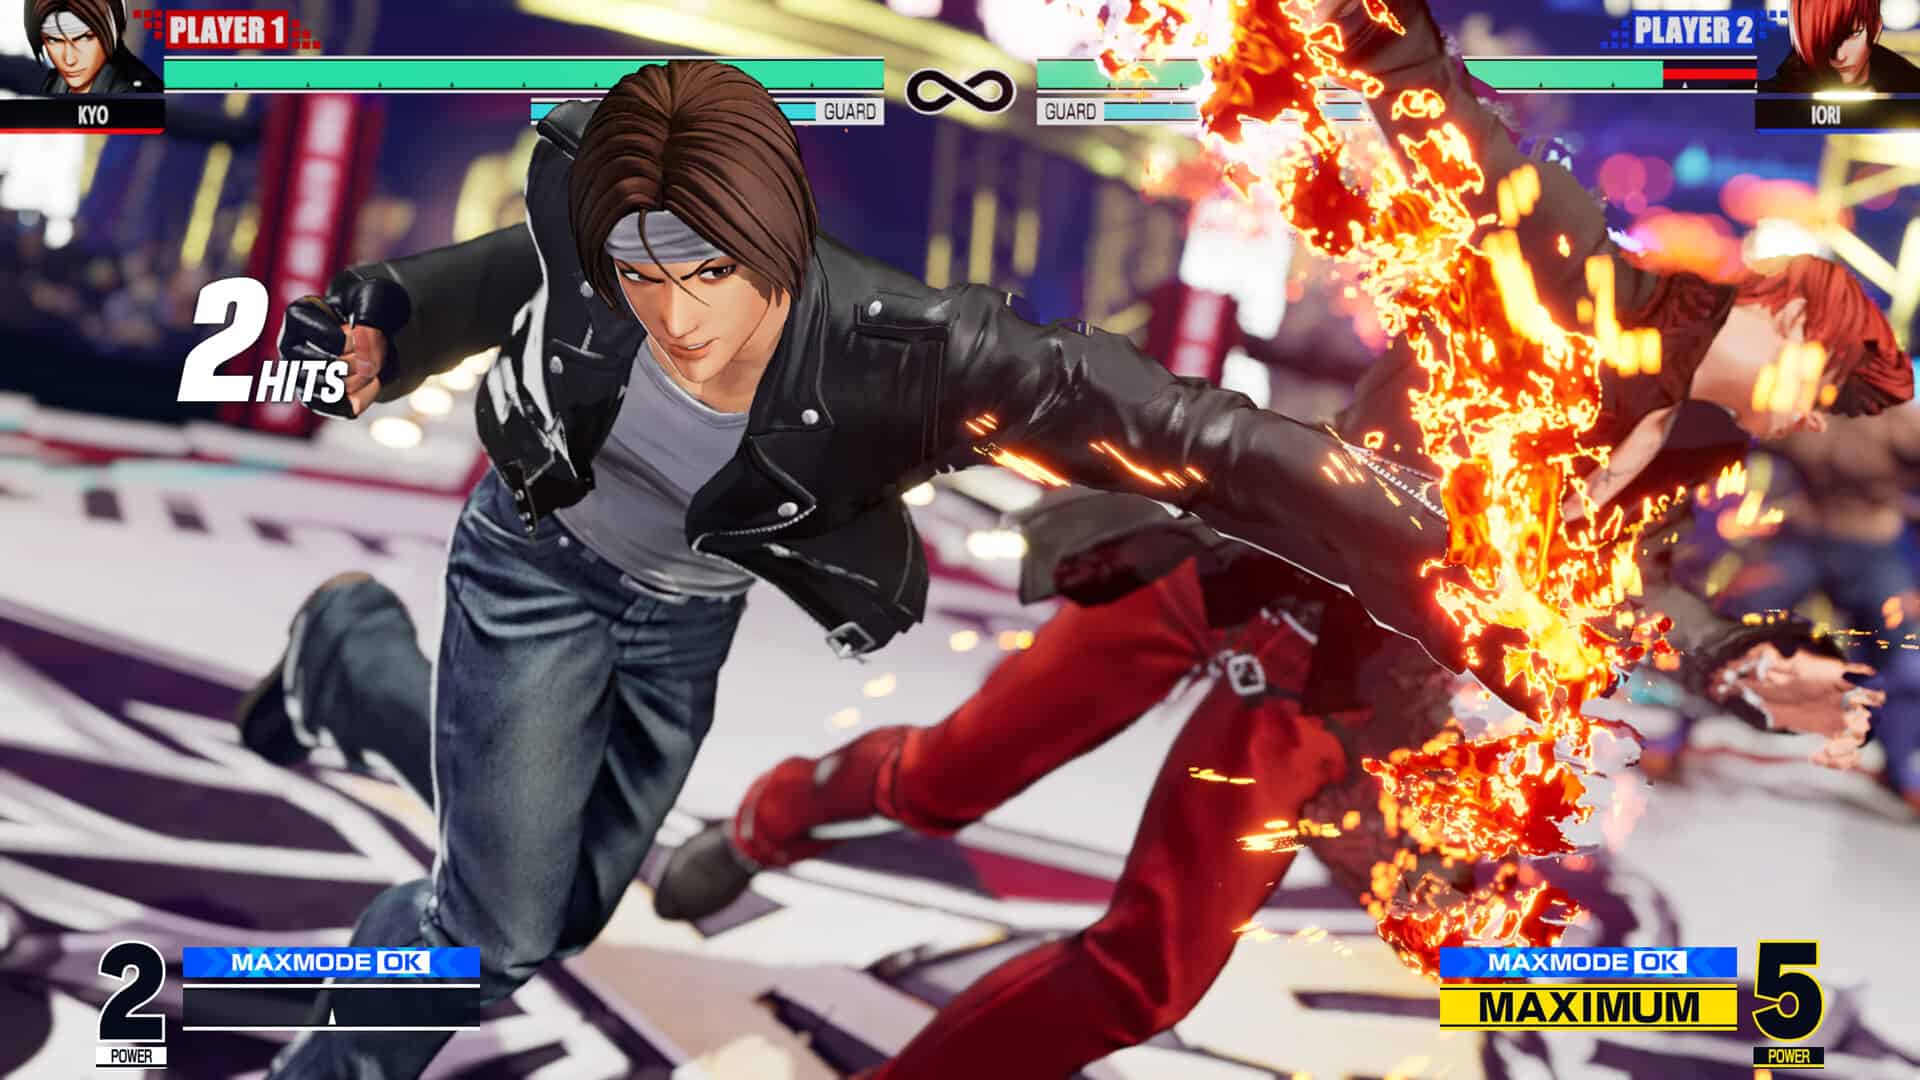 The King of Fighters XV gets ready for a fight in launch trailer